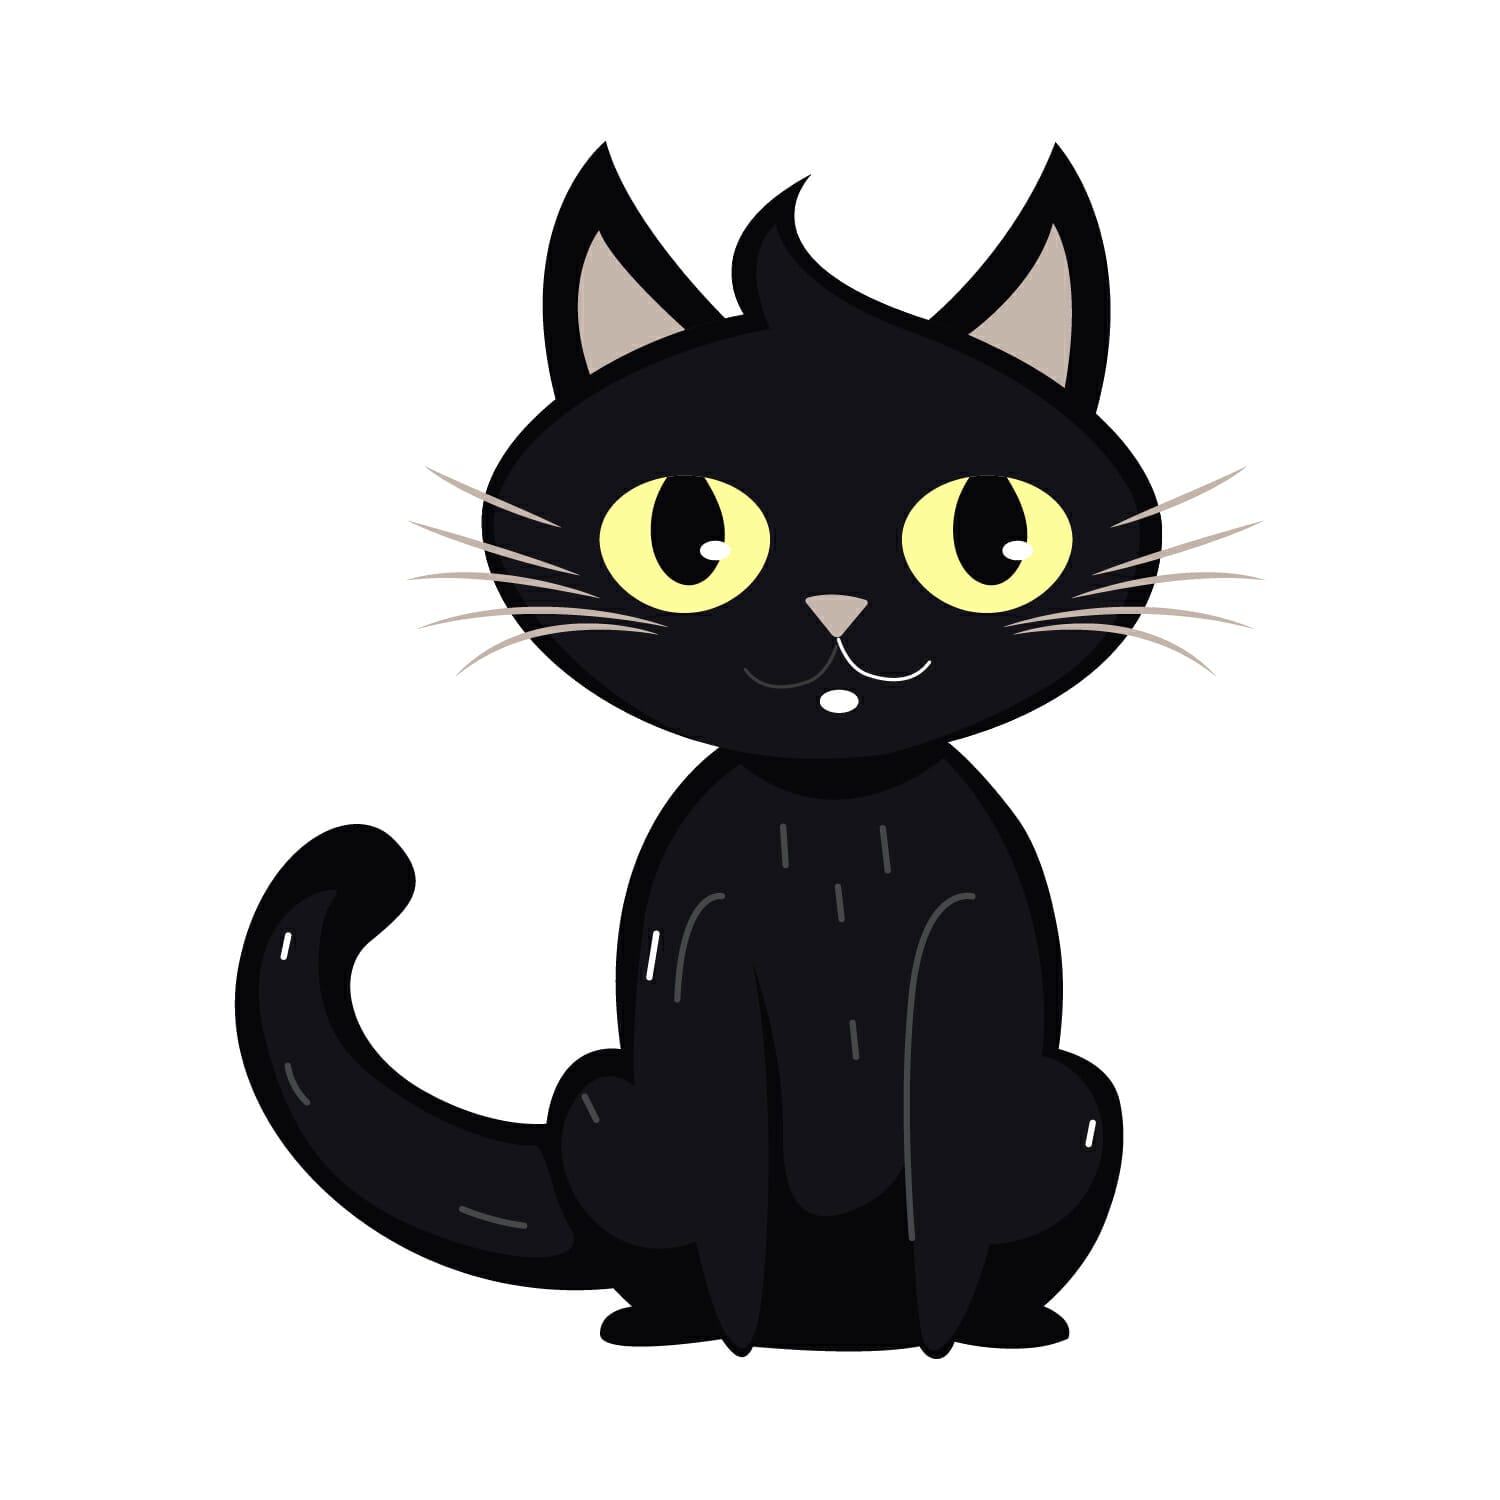 Smiling black cat vector For Free